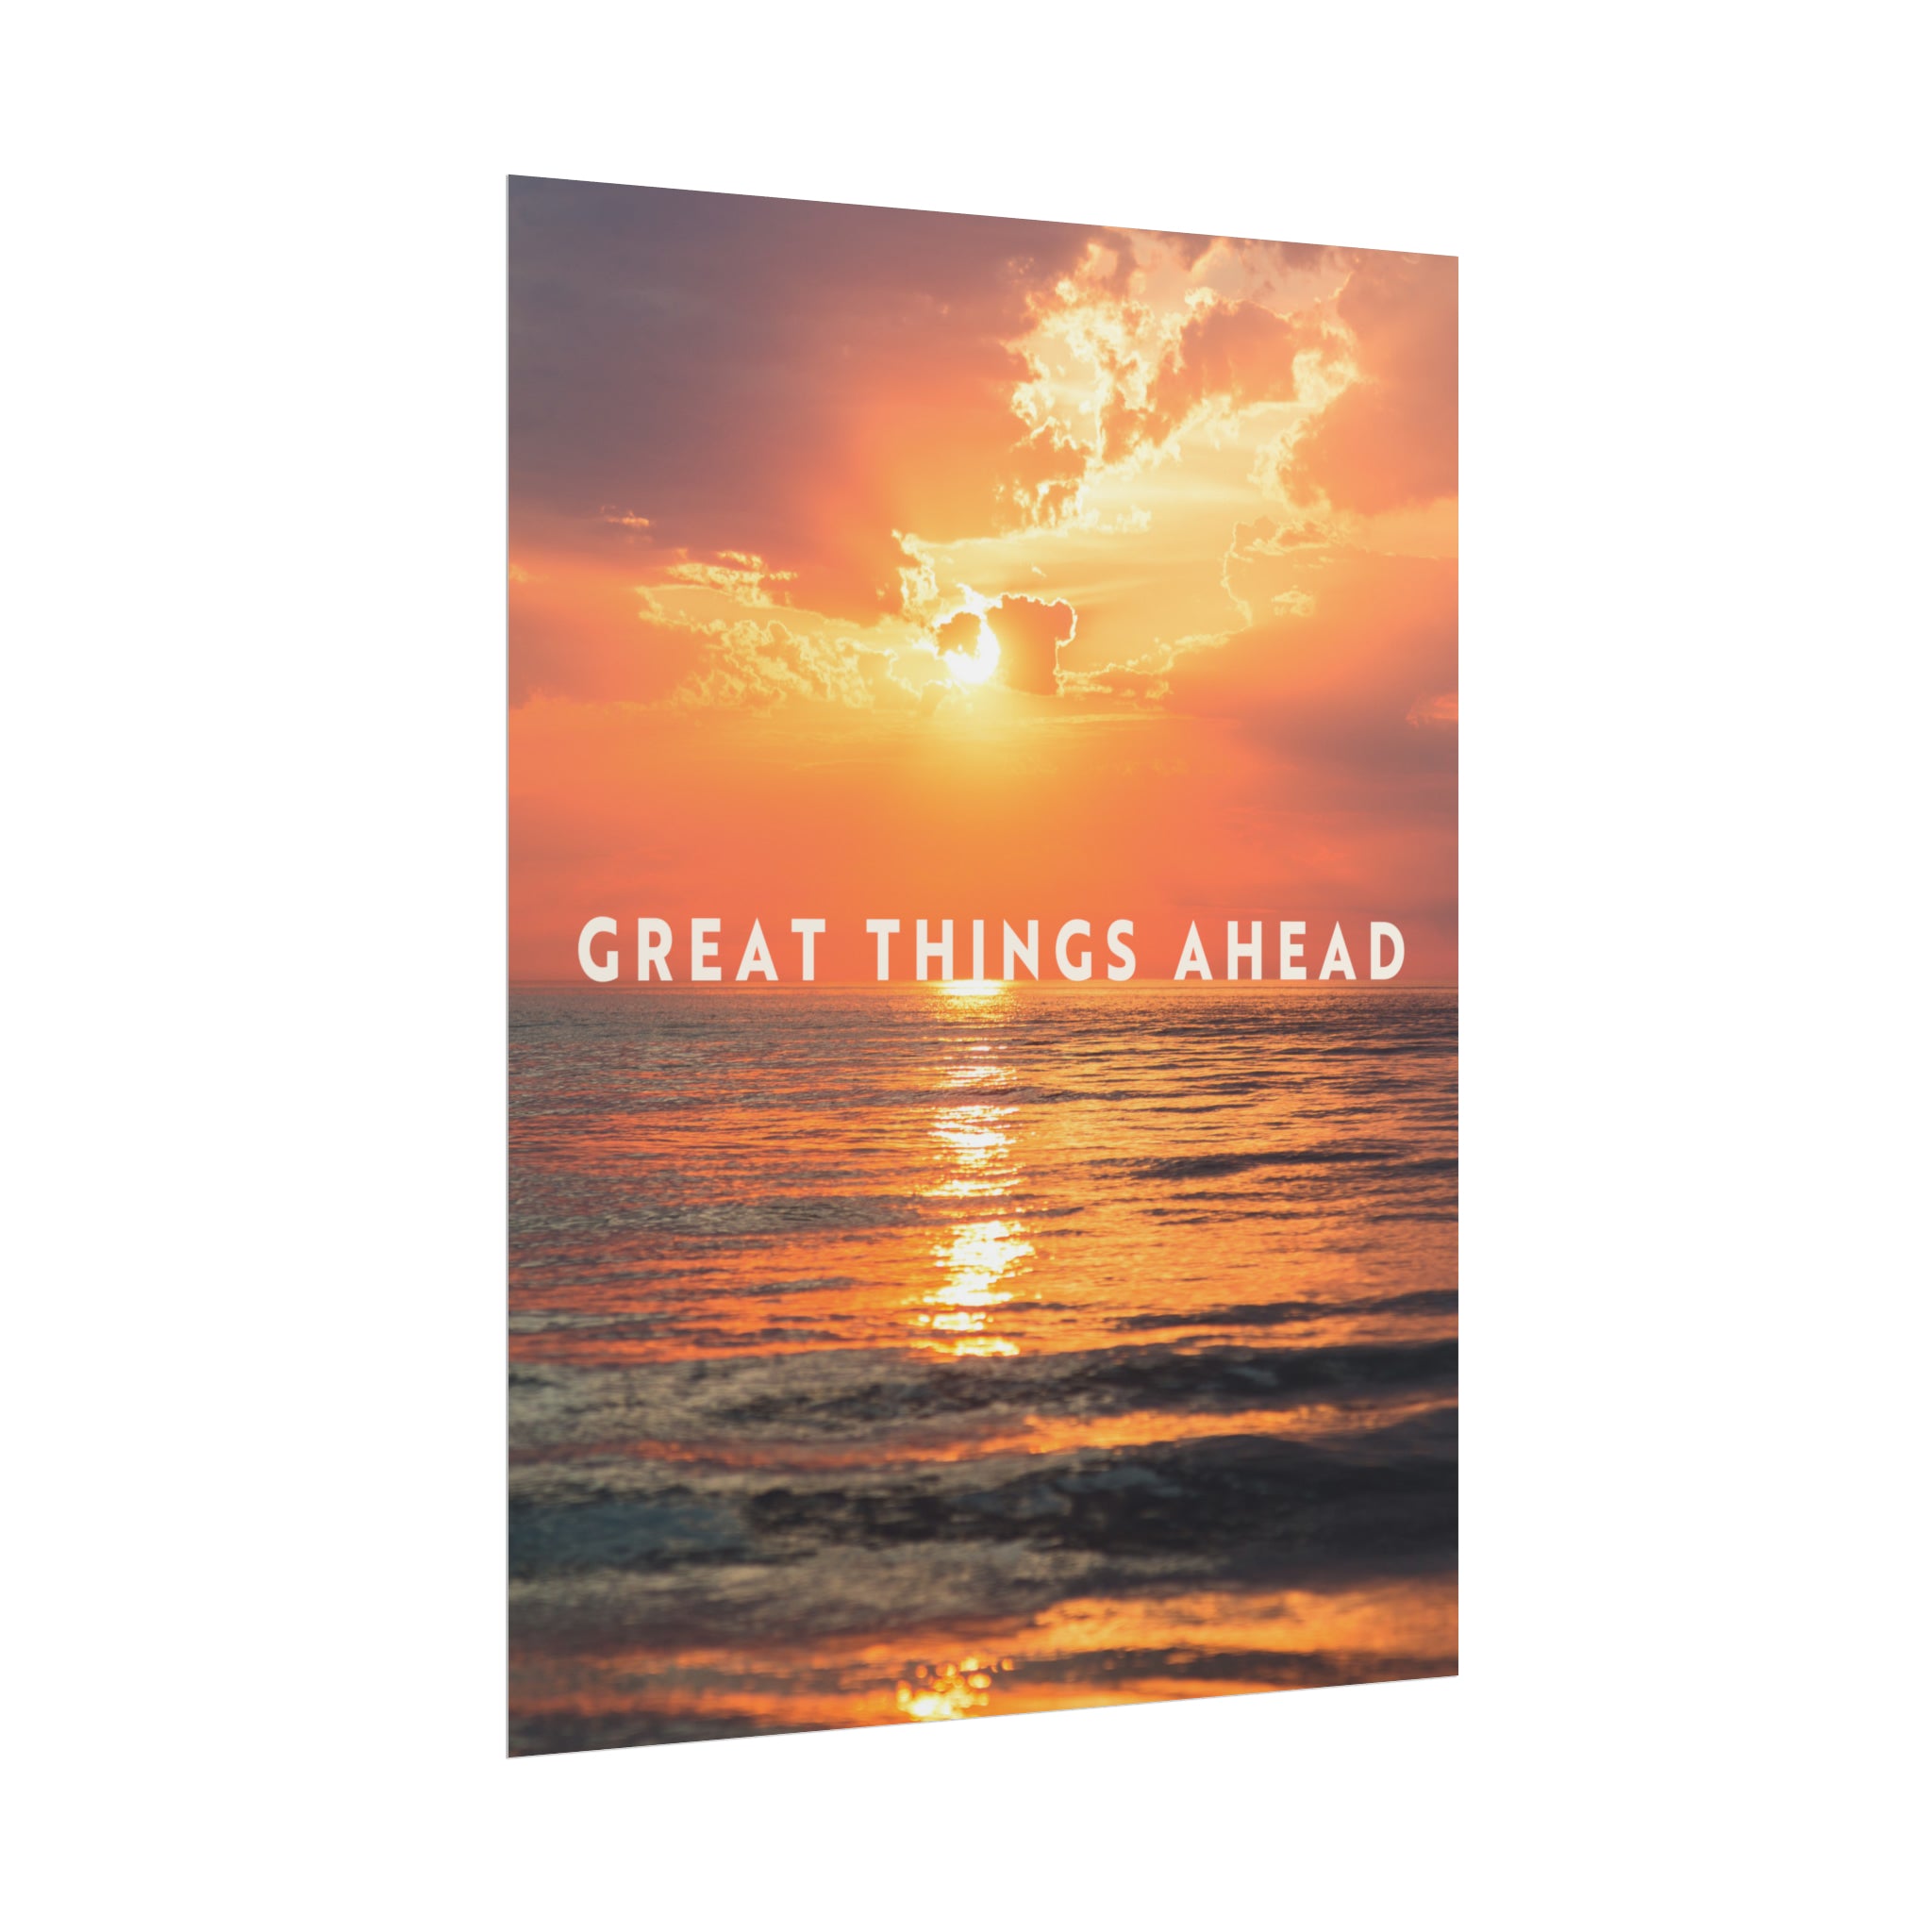 Great Things Ahead - Sunrise - Poster additional image 1